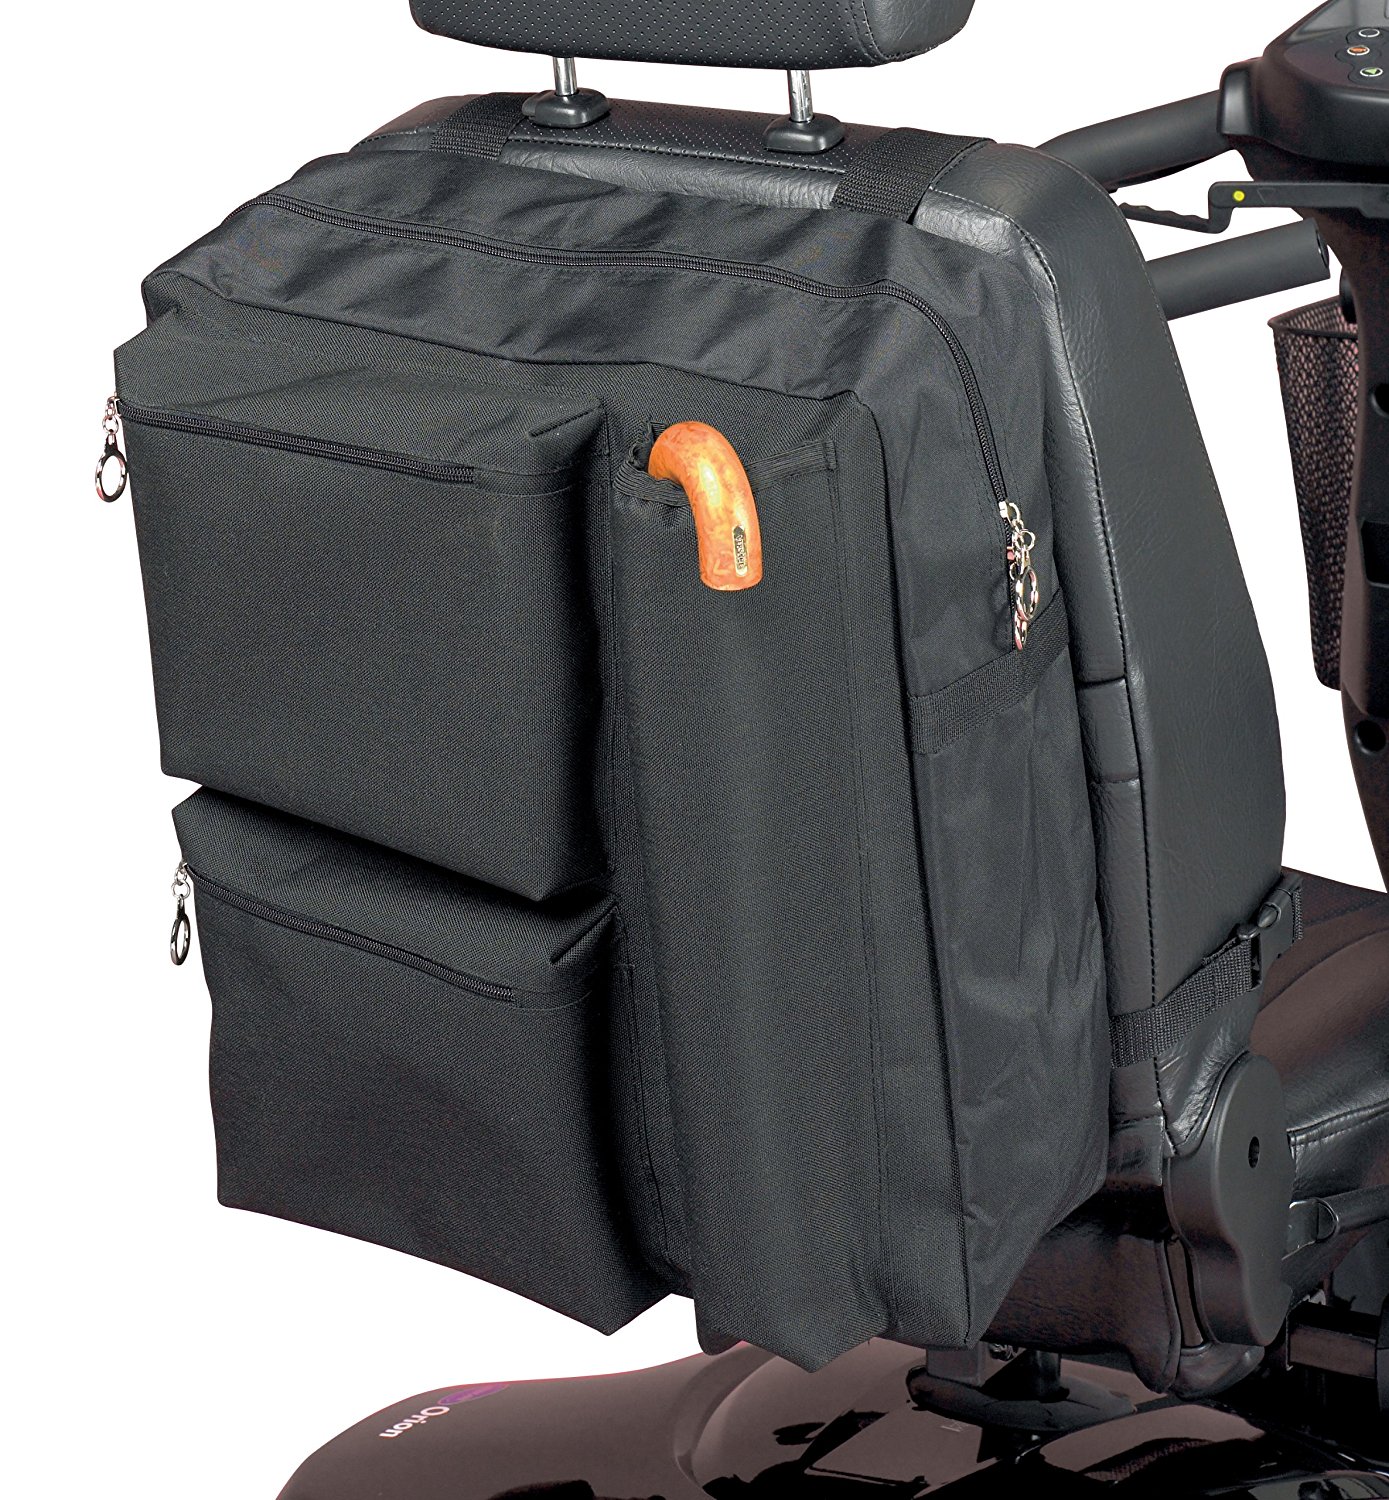 mobility scooter travel bag